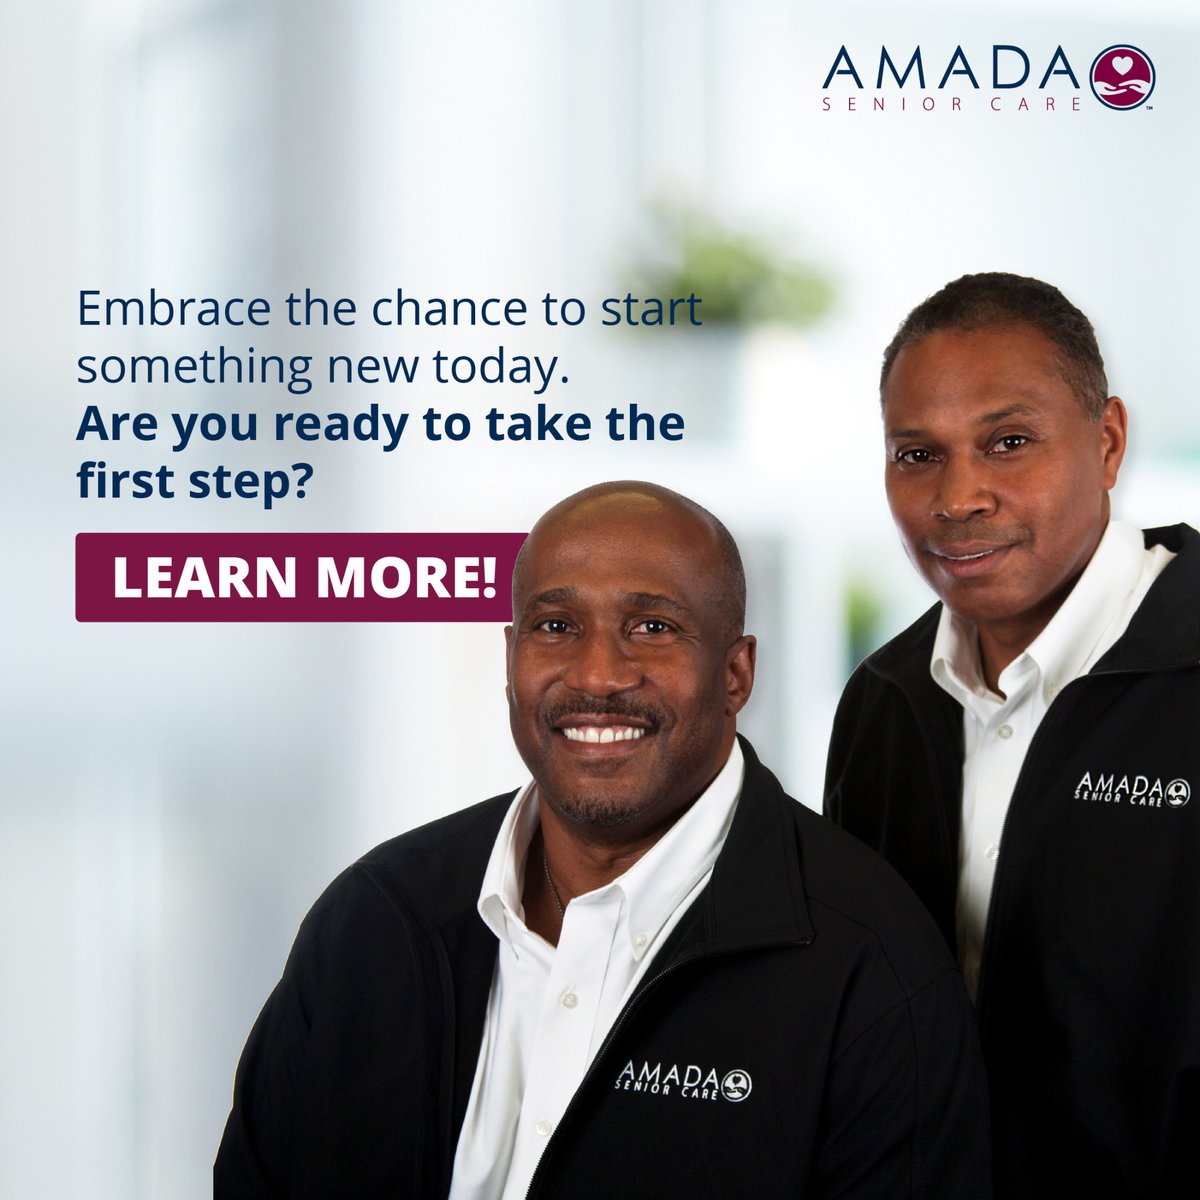 Opportunity is everywhere! 🌟 Ready to take the first step? Embrace the chance to start something new today.
Visit amadaseniorcare.com/franchise/ to get started! 🚀 

#AmadaSeniorCare #FranchiseWithUs #SeniorCare #MotivationMonday